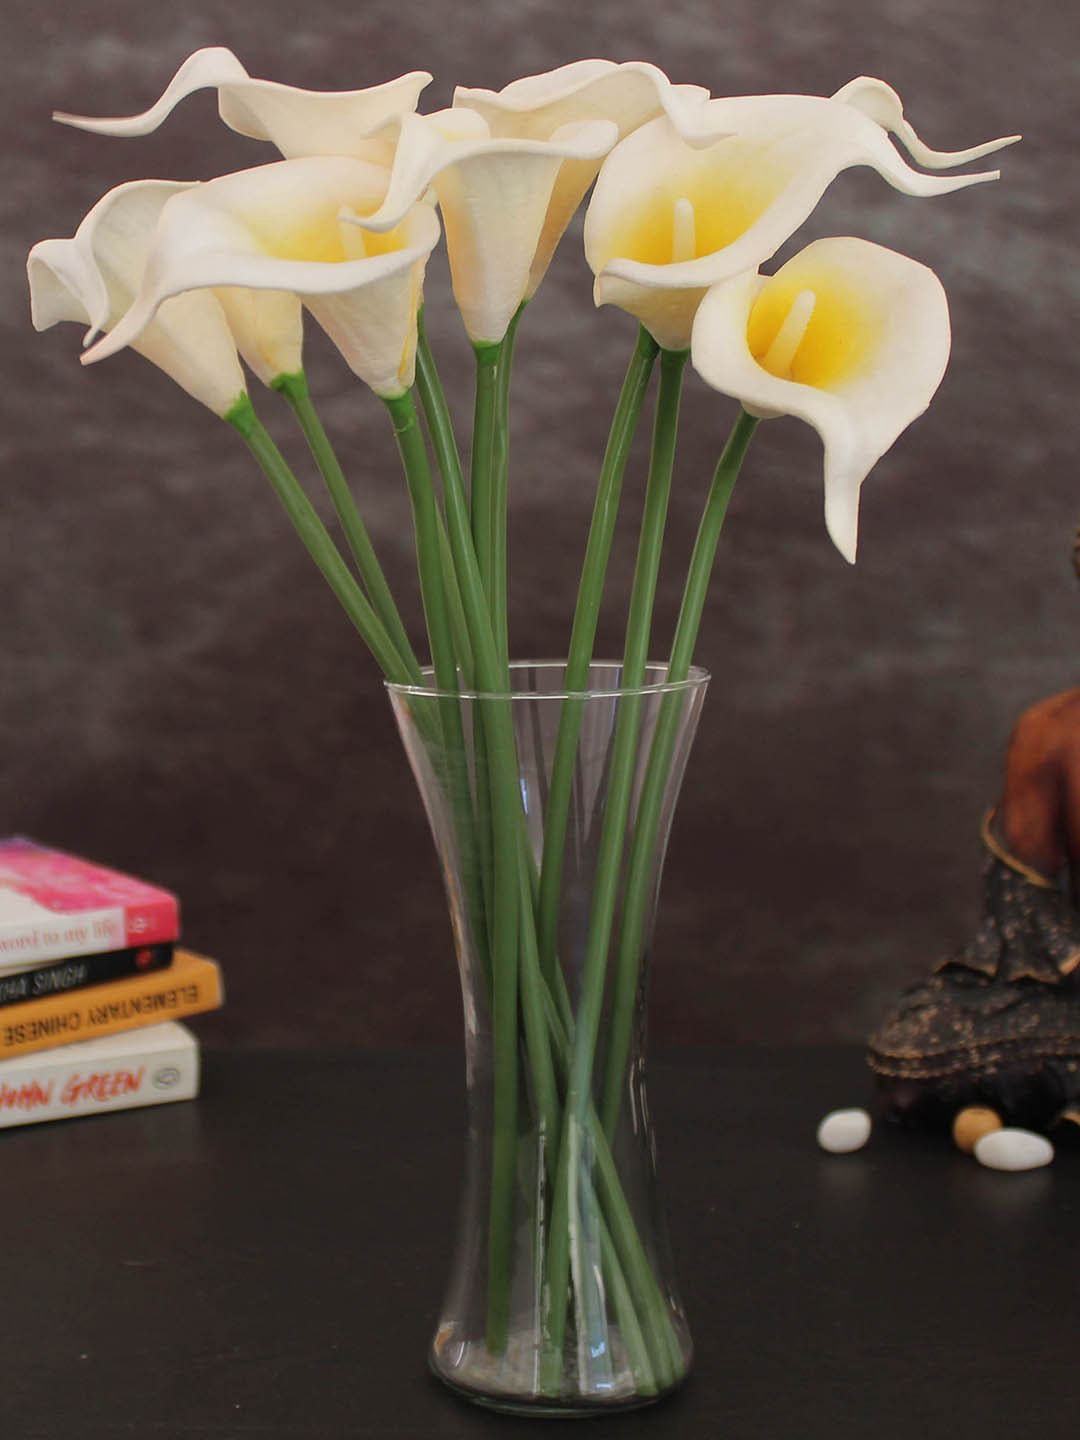 TIED RIBBONS Set of 10 White & Yellow Artificial Calla Lily Flower Sticks with Vase Pot Price in India